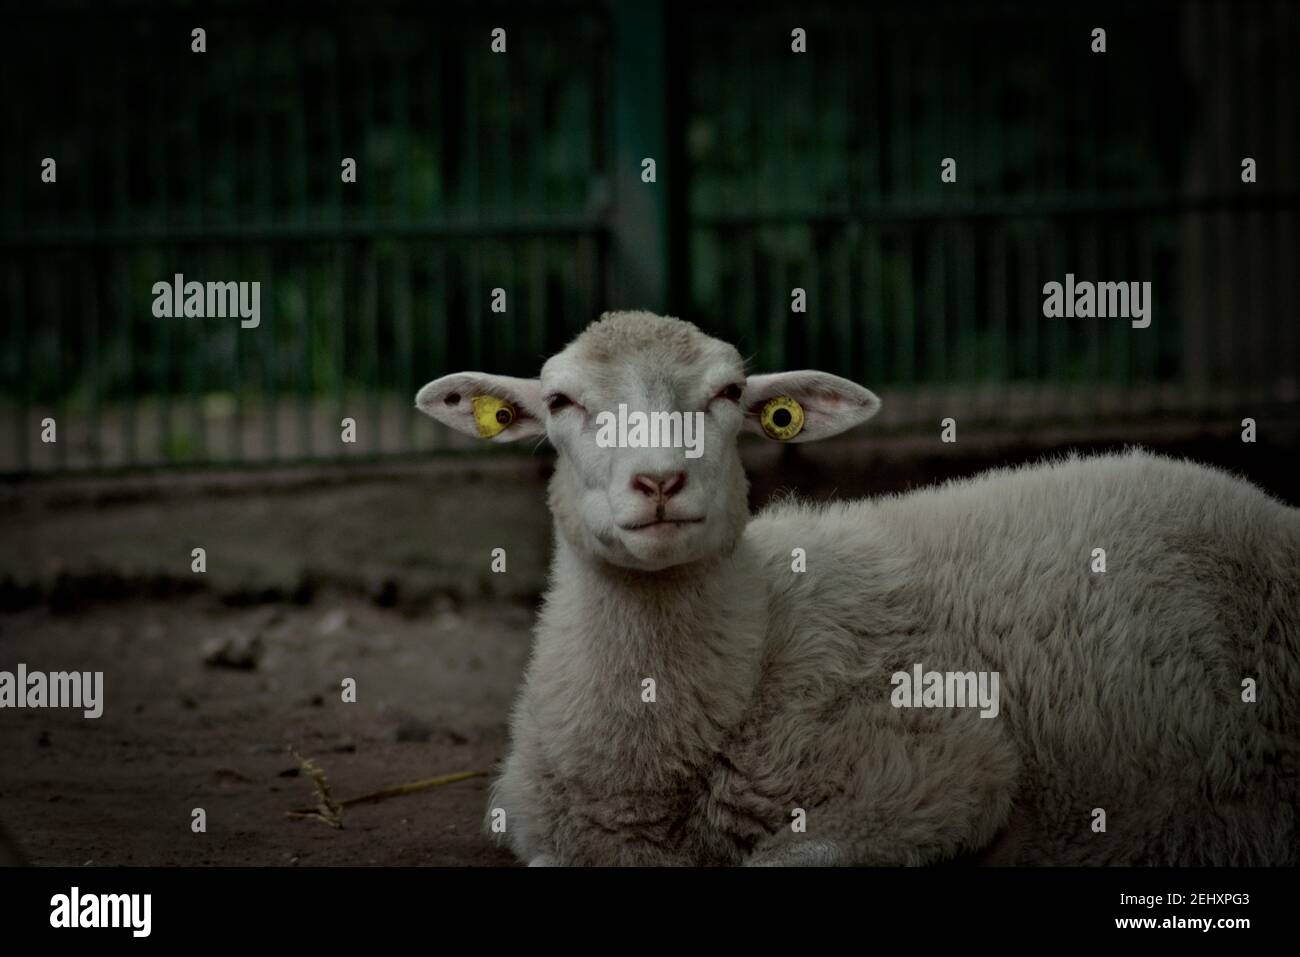 Group of Domestic Sheep Stock Photo